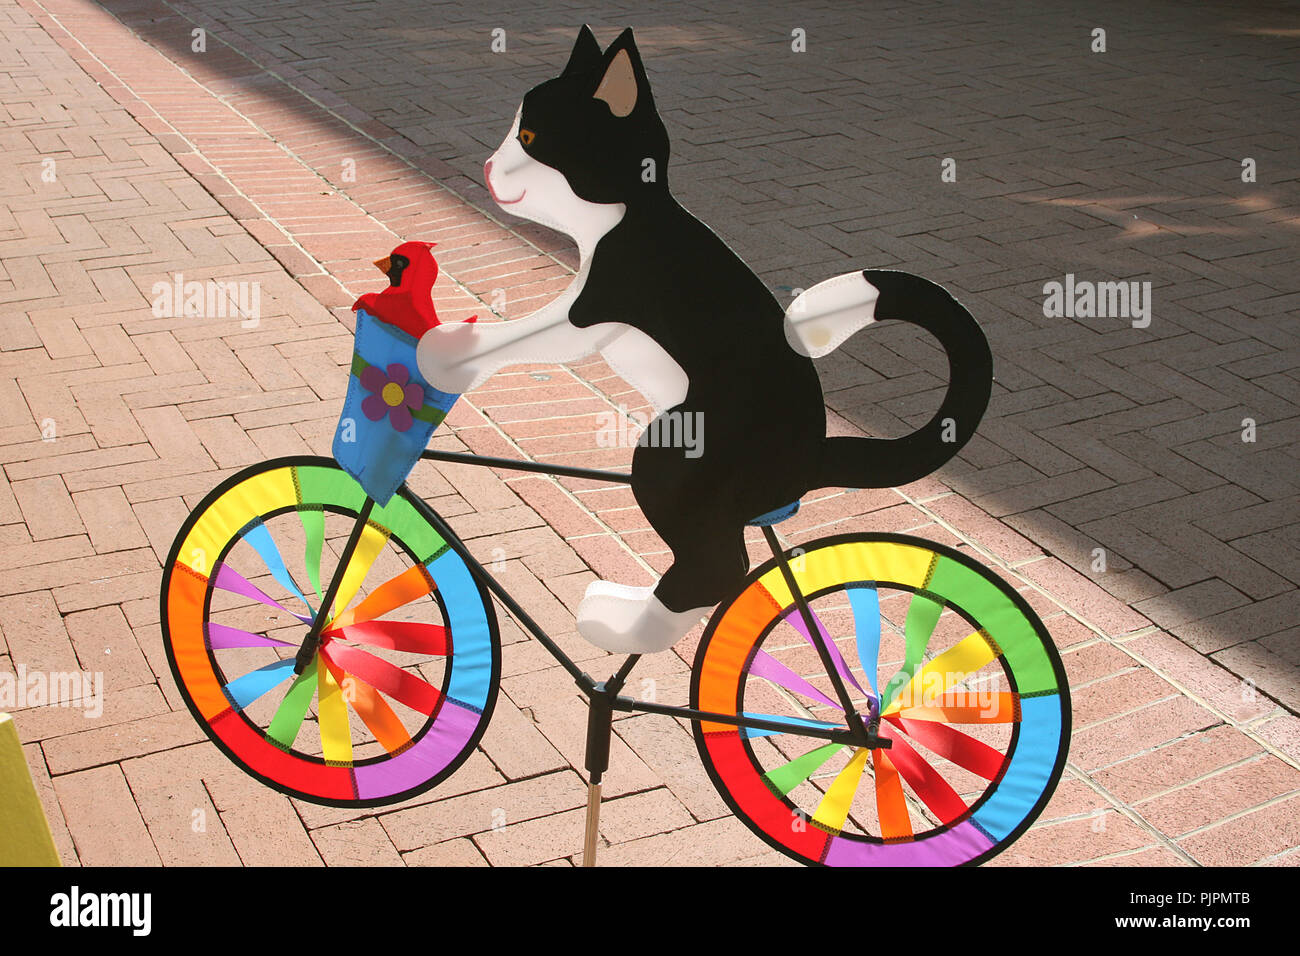 Cat on bicycle. Colorful outdoor decor. Stock Photo